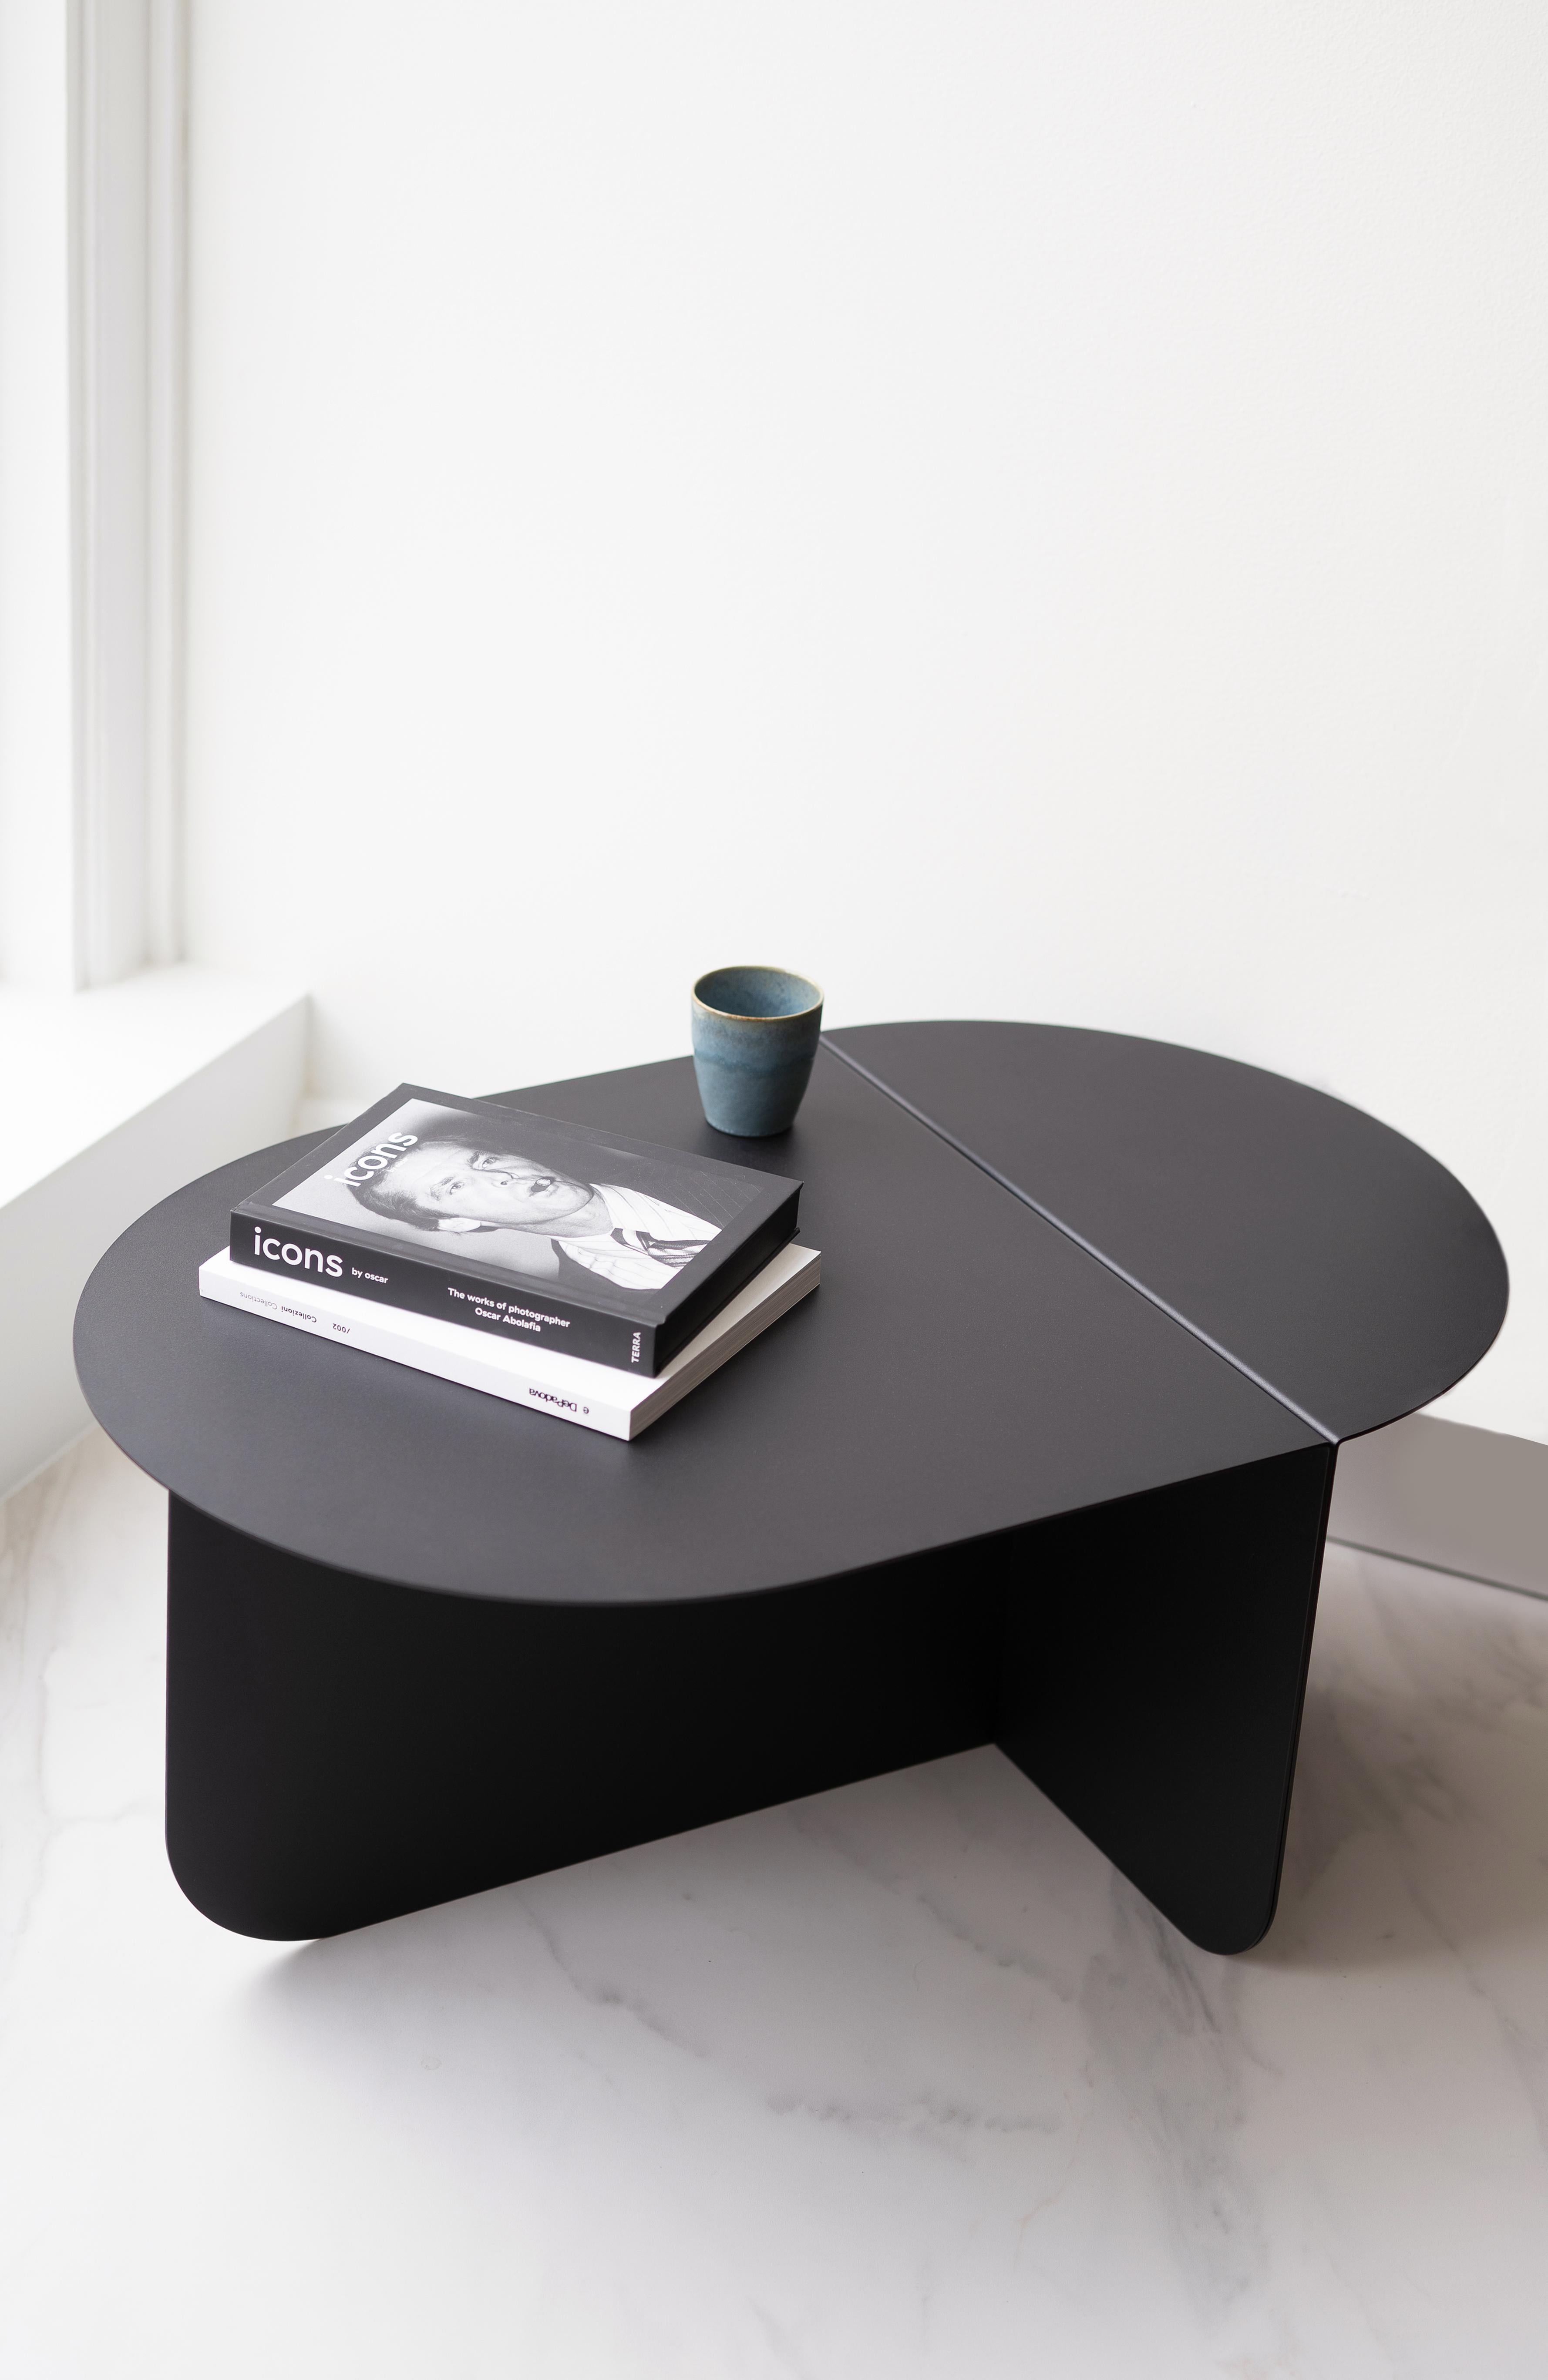 Powder-Coated Colour, a Modern Oval Coffee Table, Ral 1001 - Beige, by Bas Vellekoop For Sale